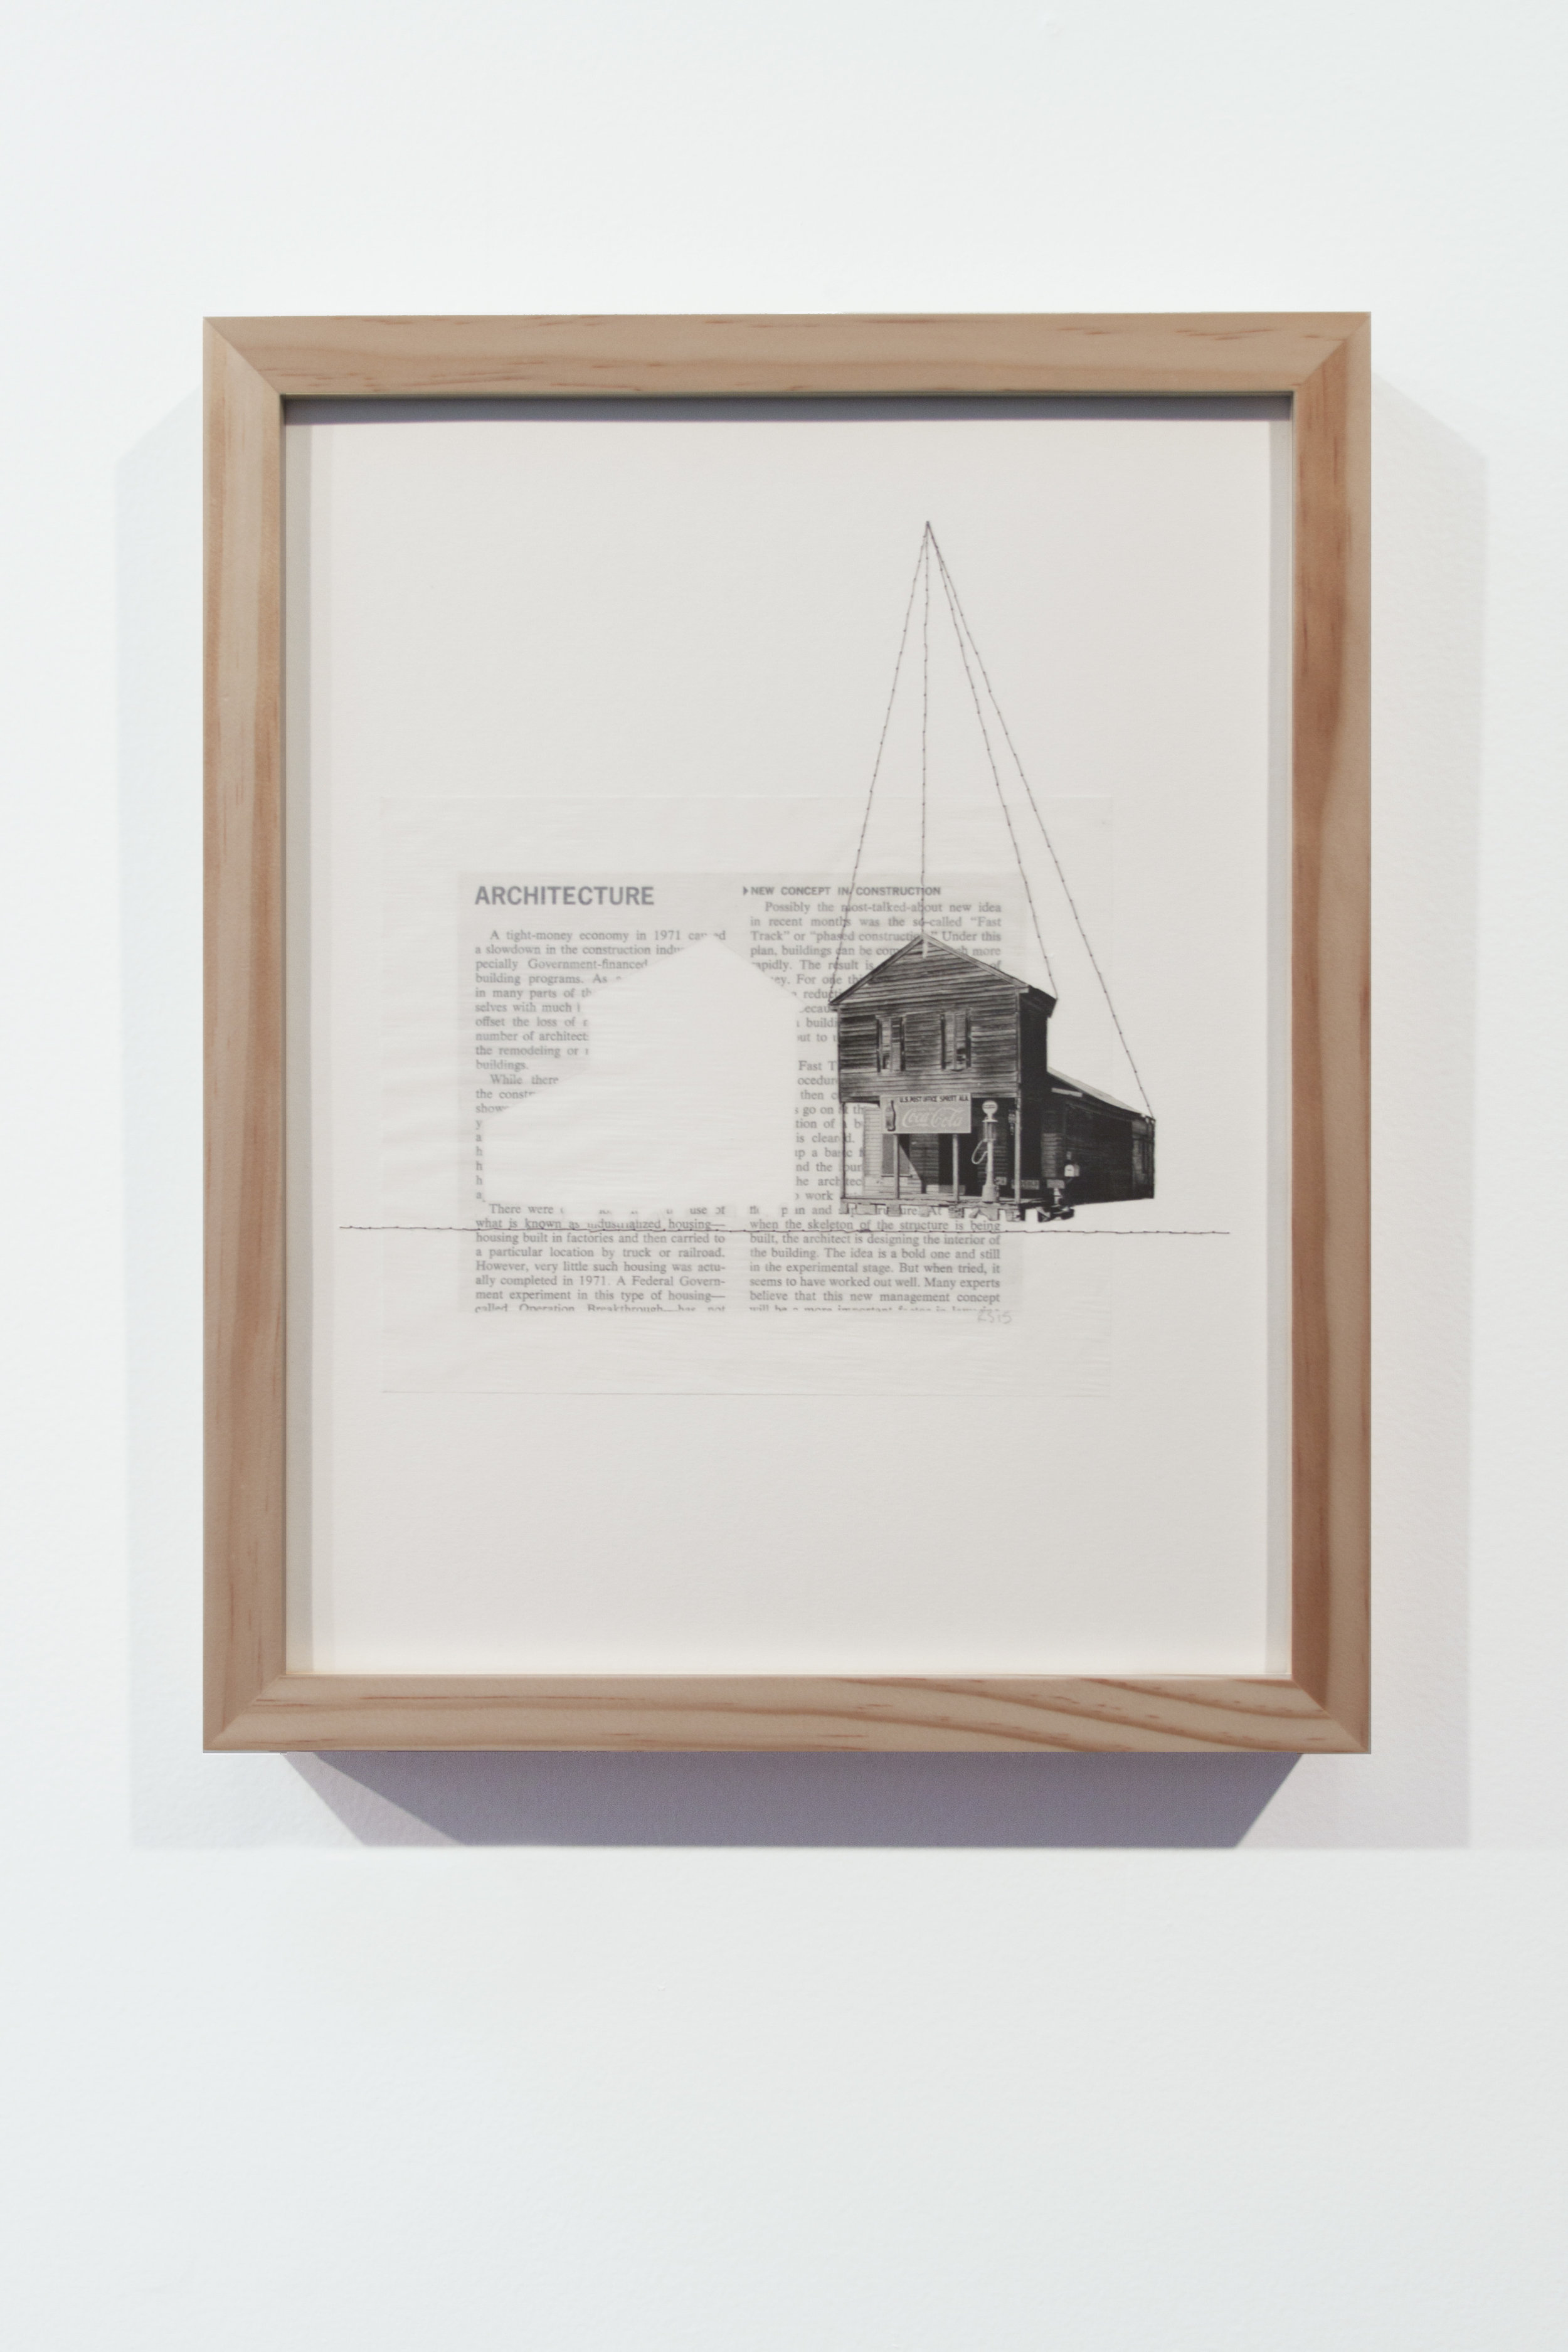   Sherrie and Walker,  11” x 14”, Thread, Trace Paper, Found Images on Paper, 2015 Photo: Jenna Gard 